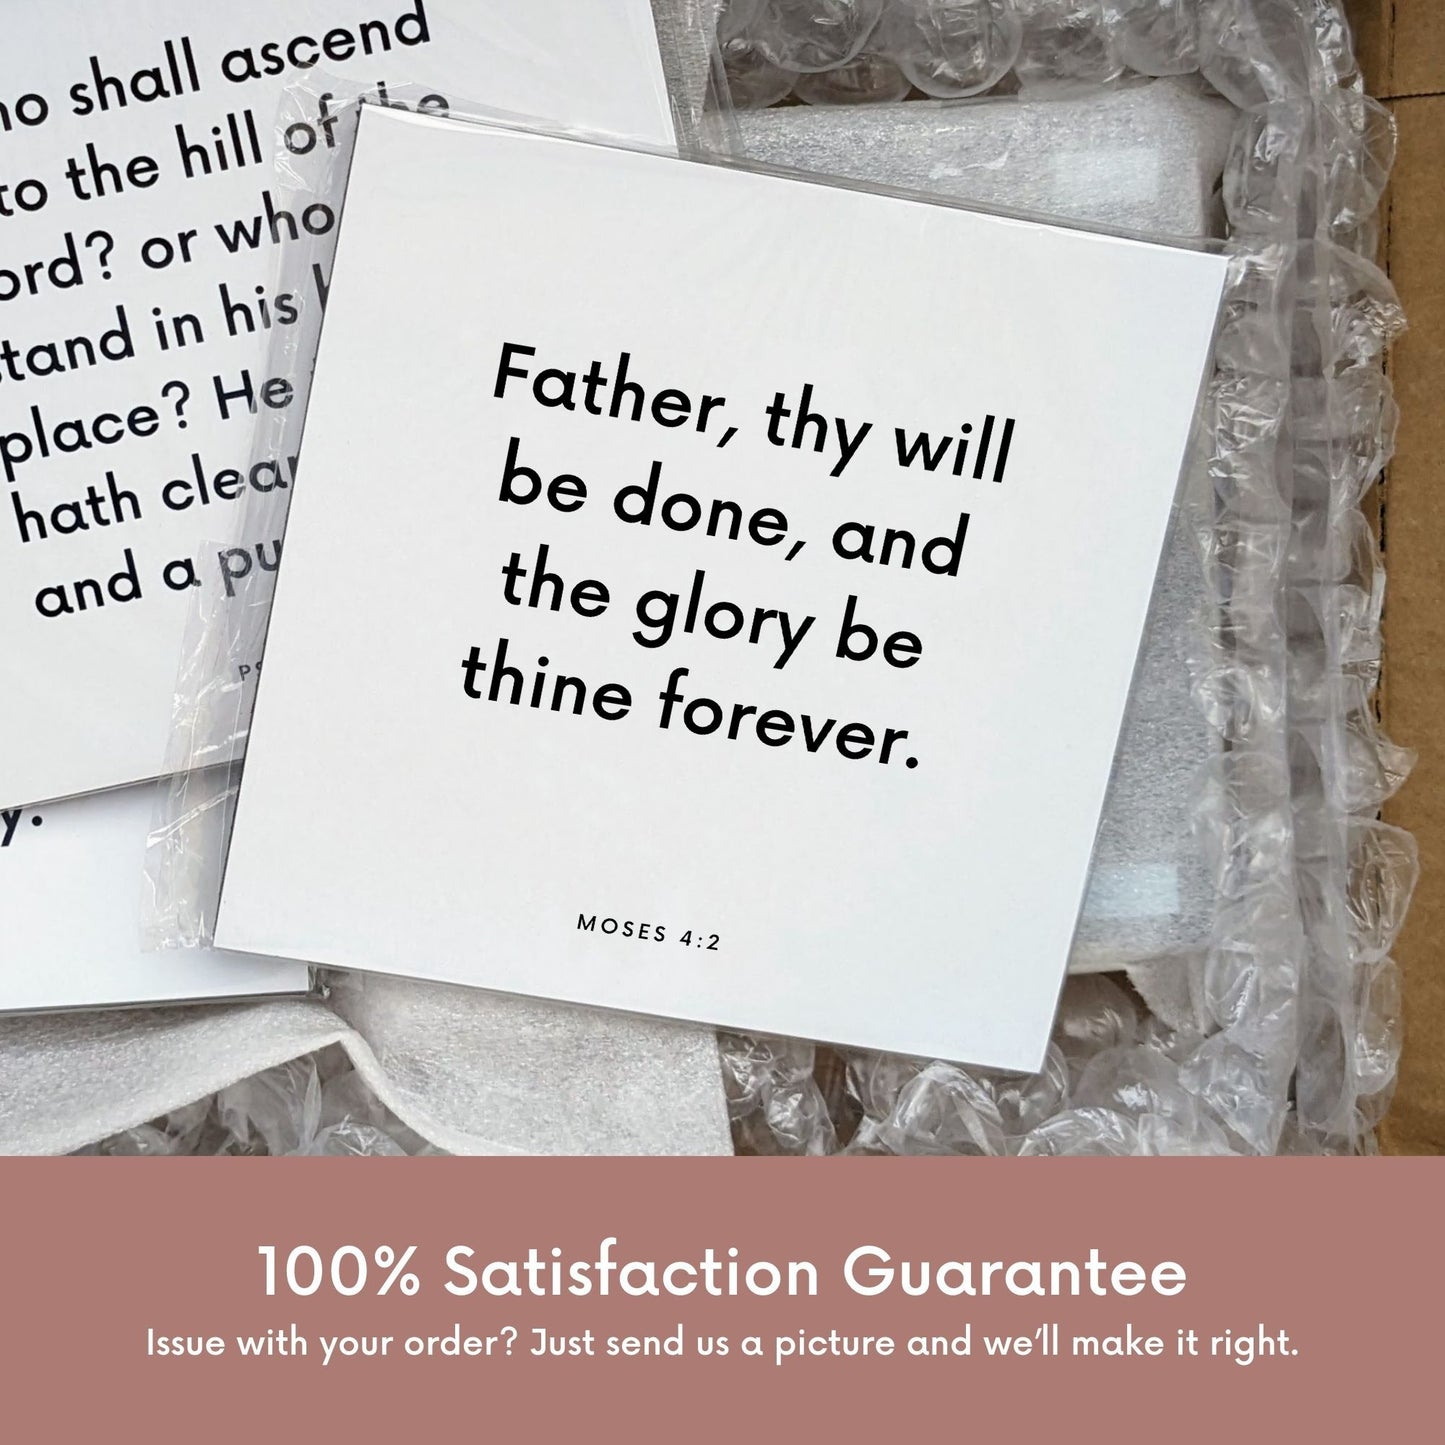 Shipping materials for scripture tile of Moses 4:2 - "Father, thy will be done, and the glory be thine forever"